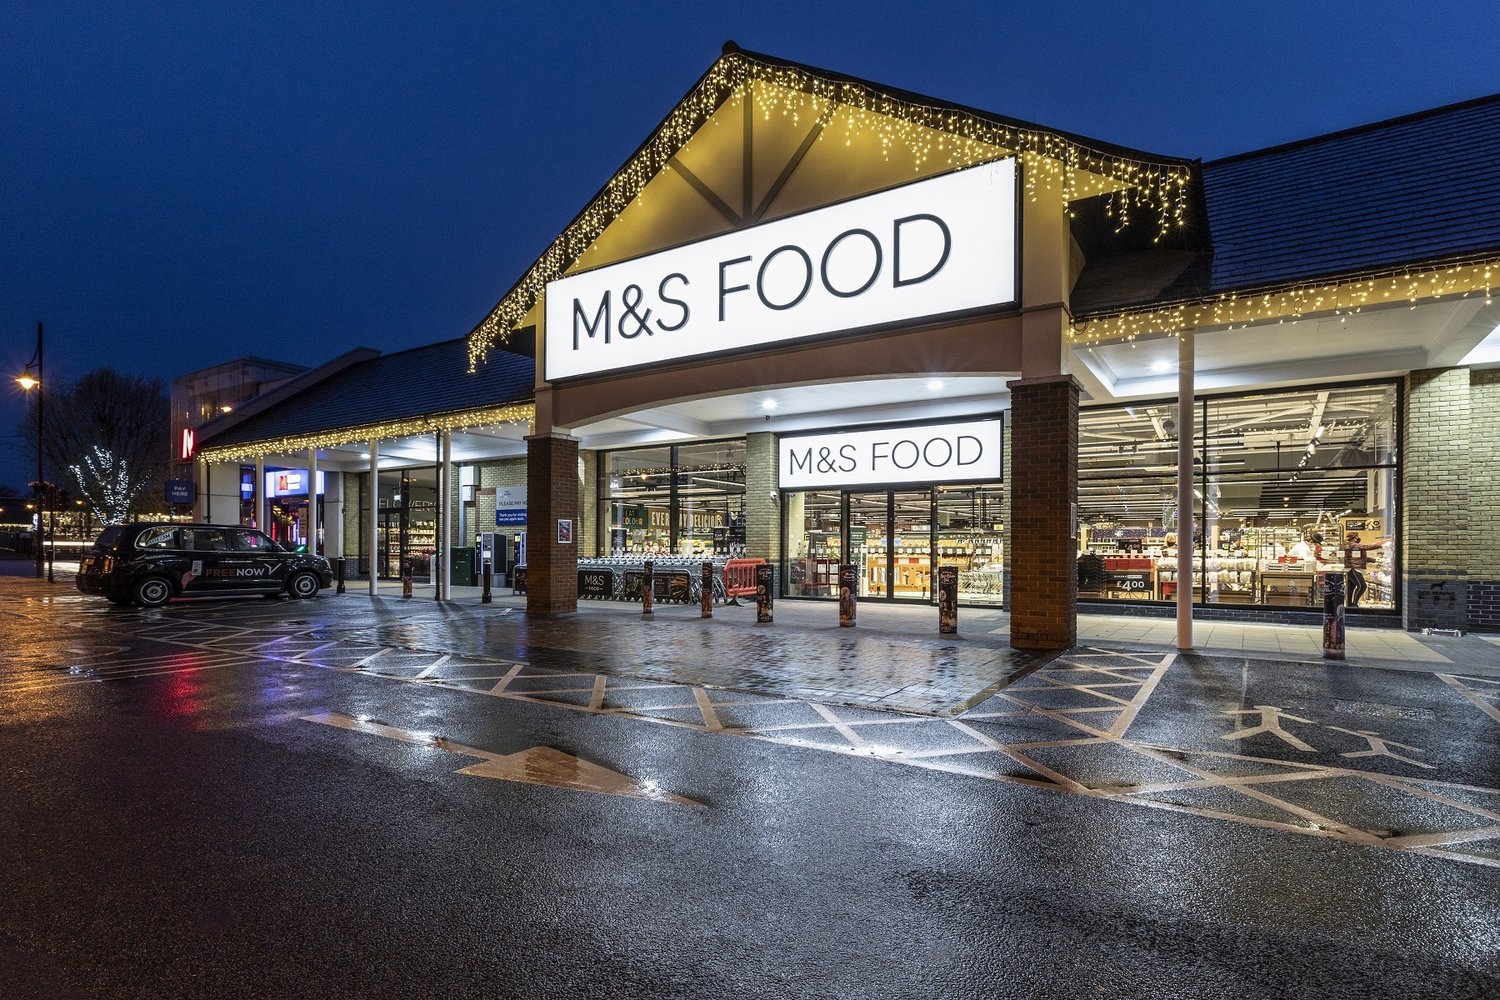 Not just any signage: We’ve secured five contracts with M&S